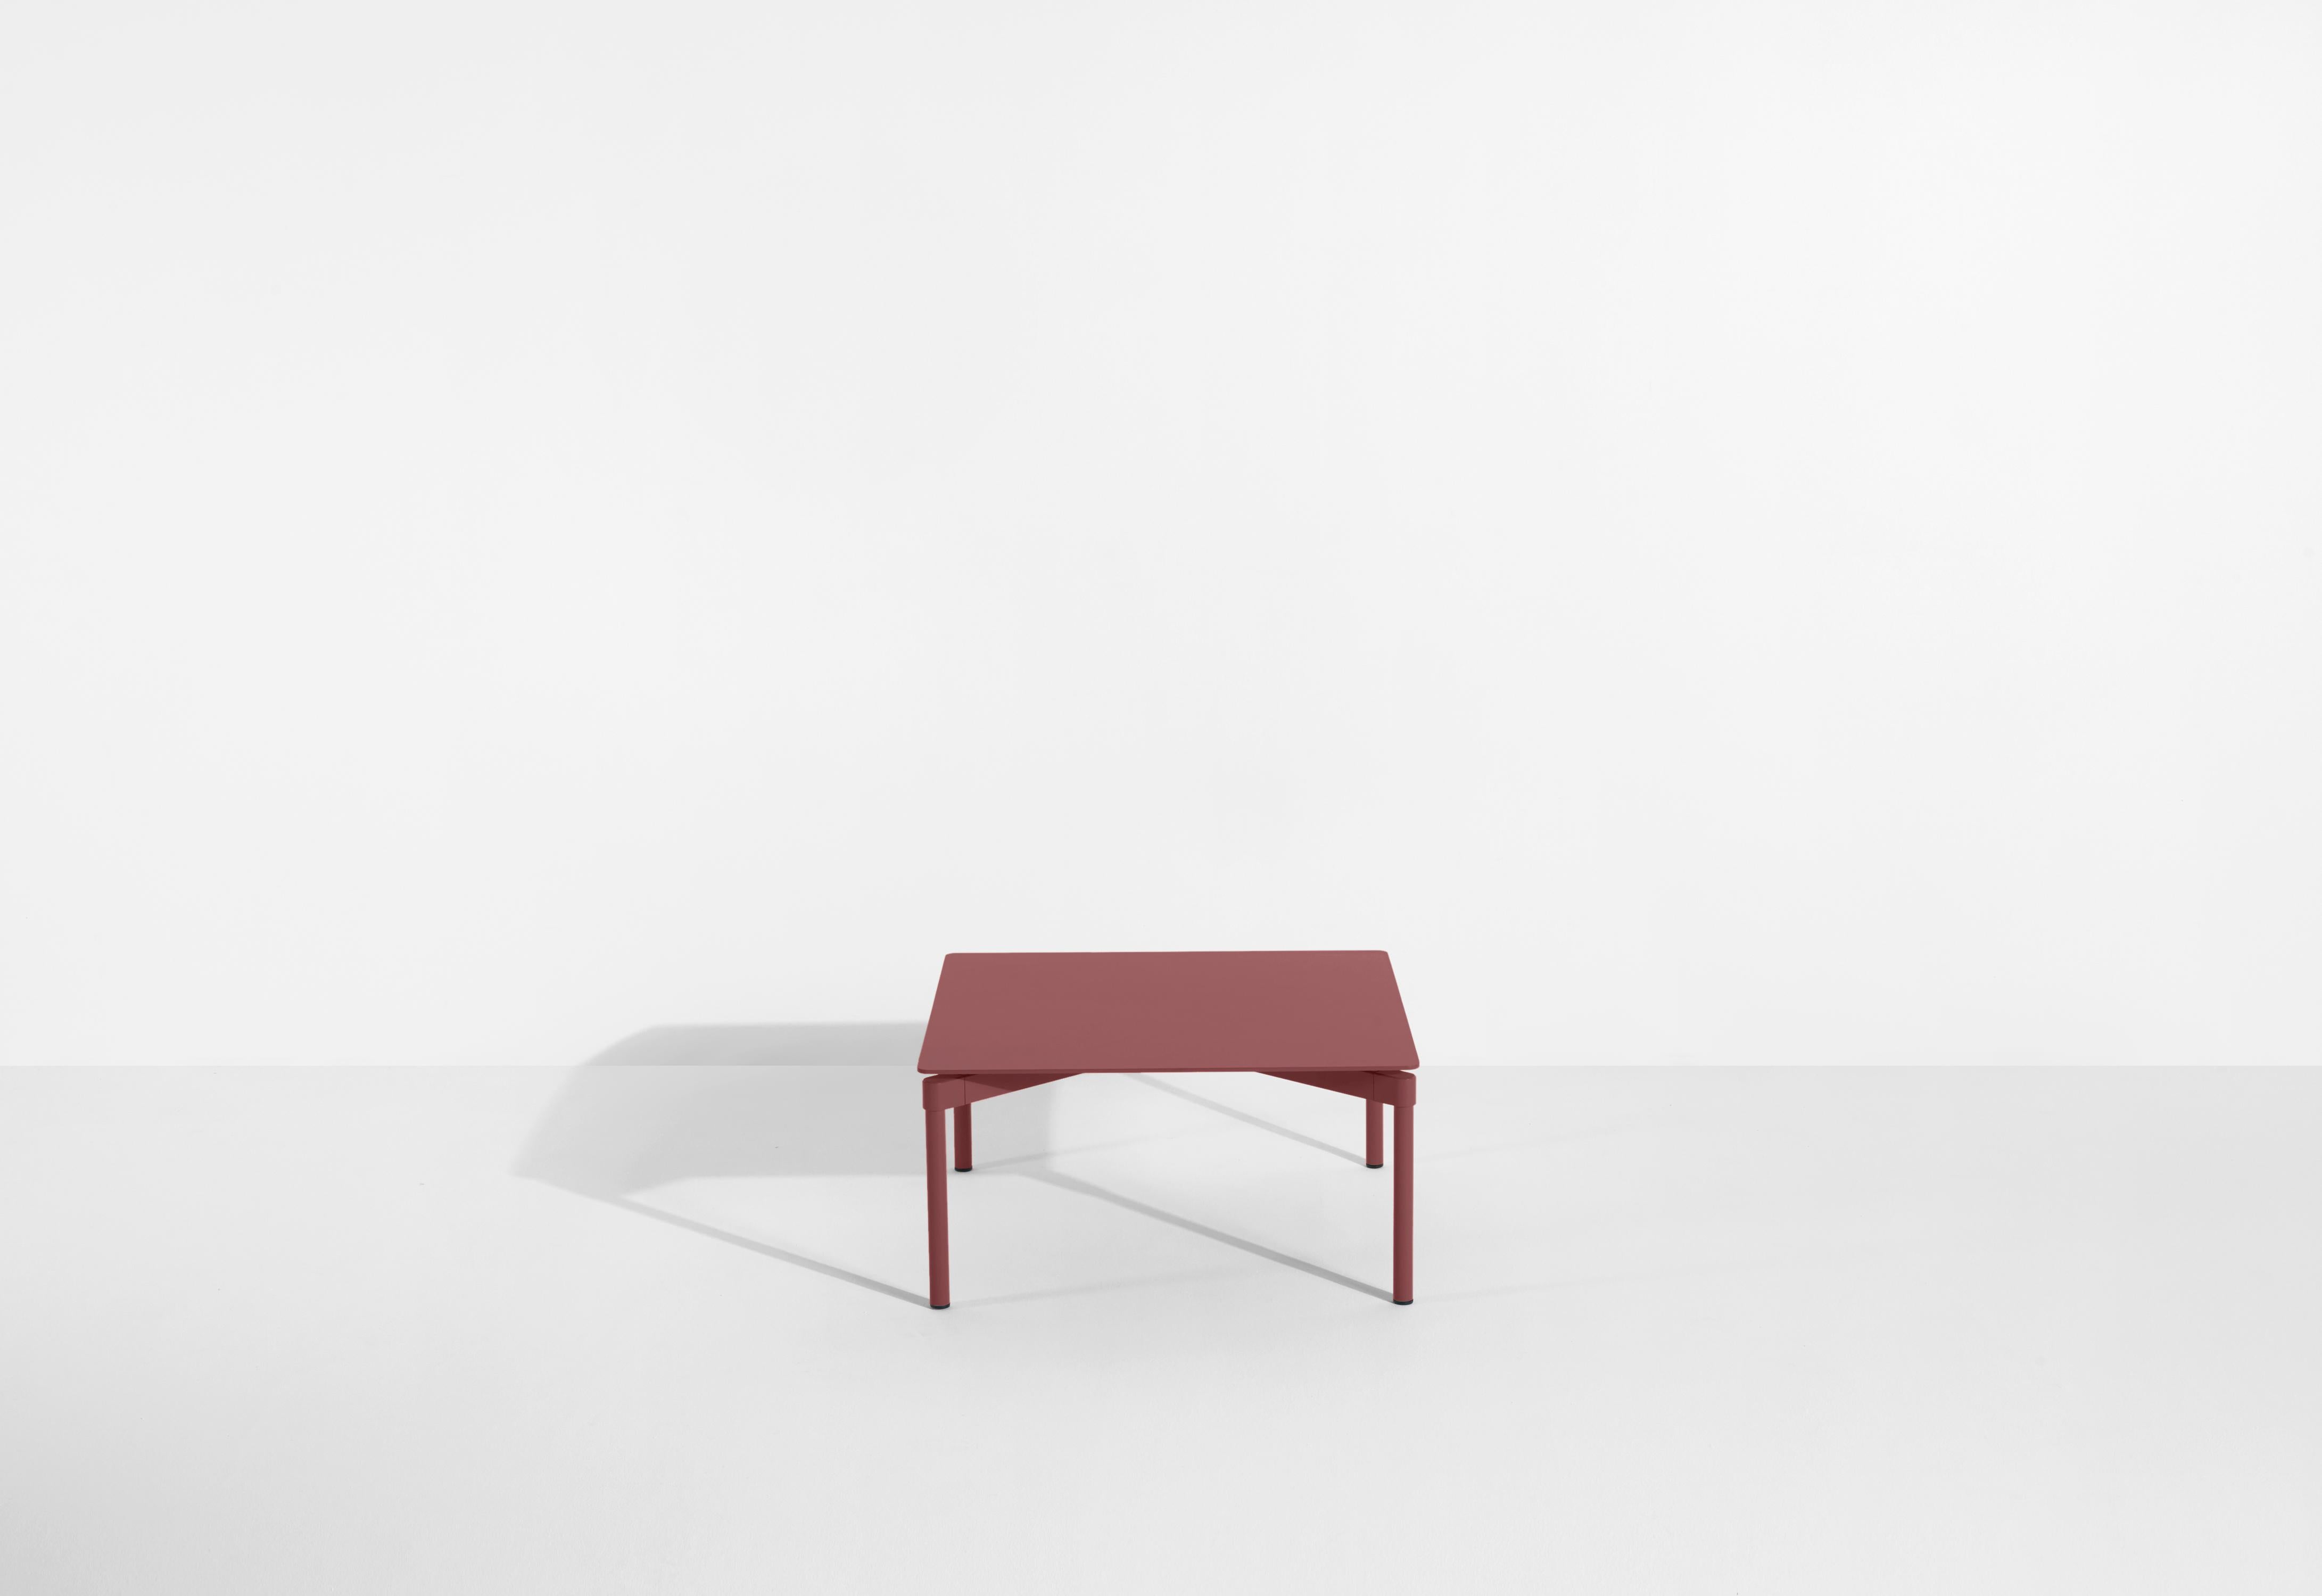 Petite Friture Fromme Coffee Table in Brown-Red Aluminium by Tom Chung, 2020 In New Condition For Sale In Brooklyn, NY